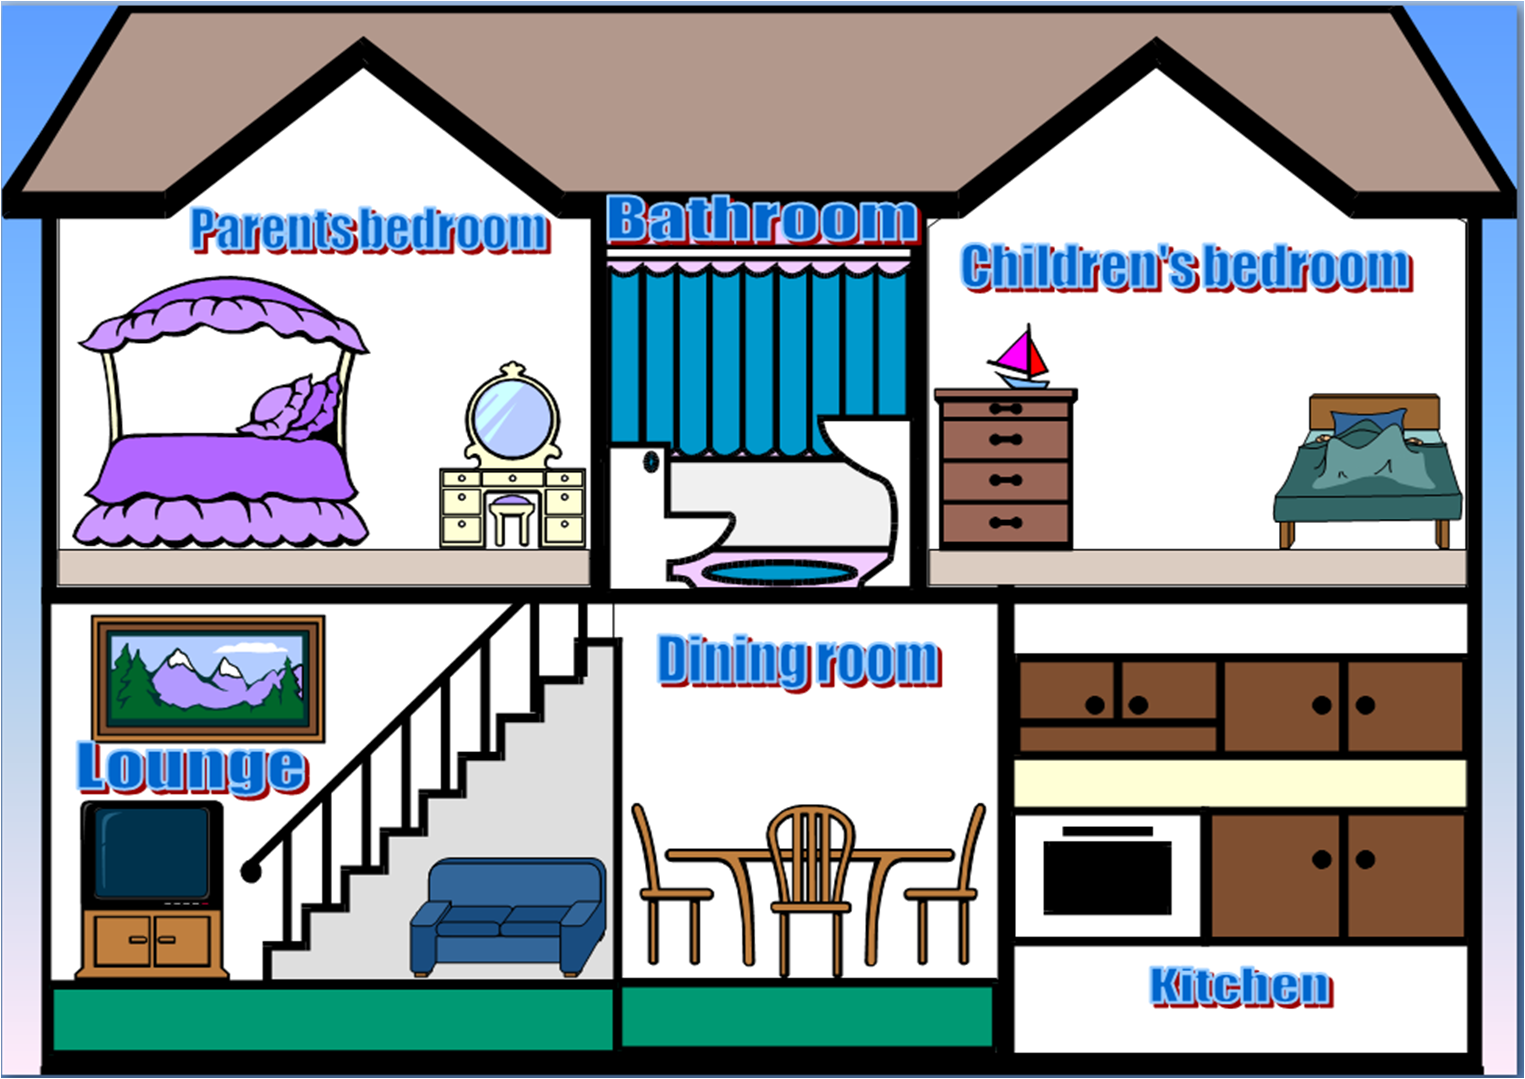 House Rooms for Kids. Rooms in the House for Kids. Parts of the House for Kids. Rooms in the House pictures. My house large